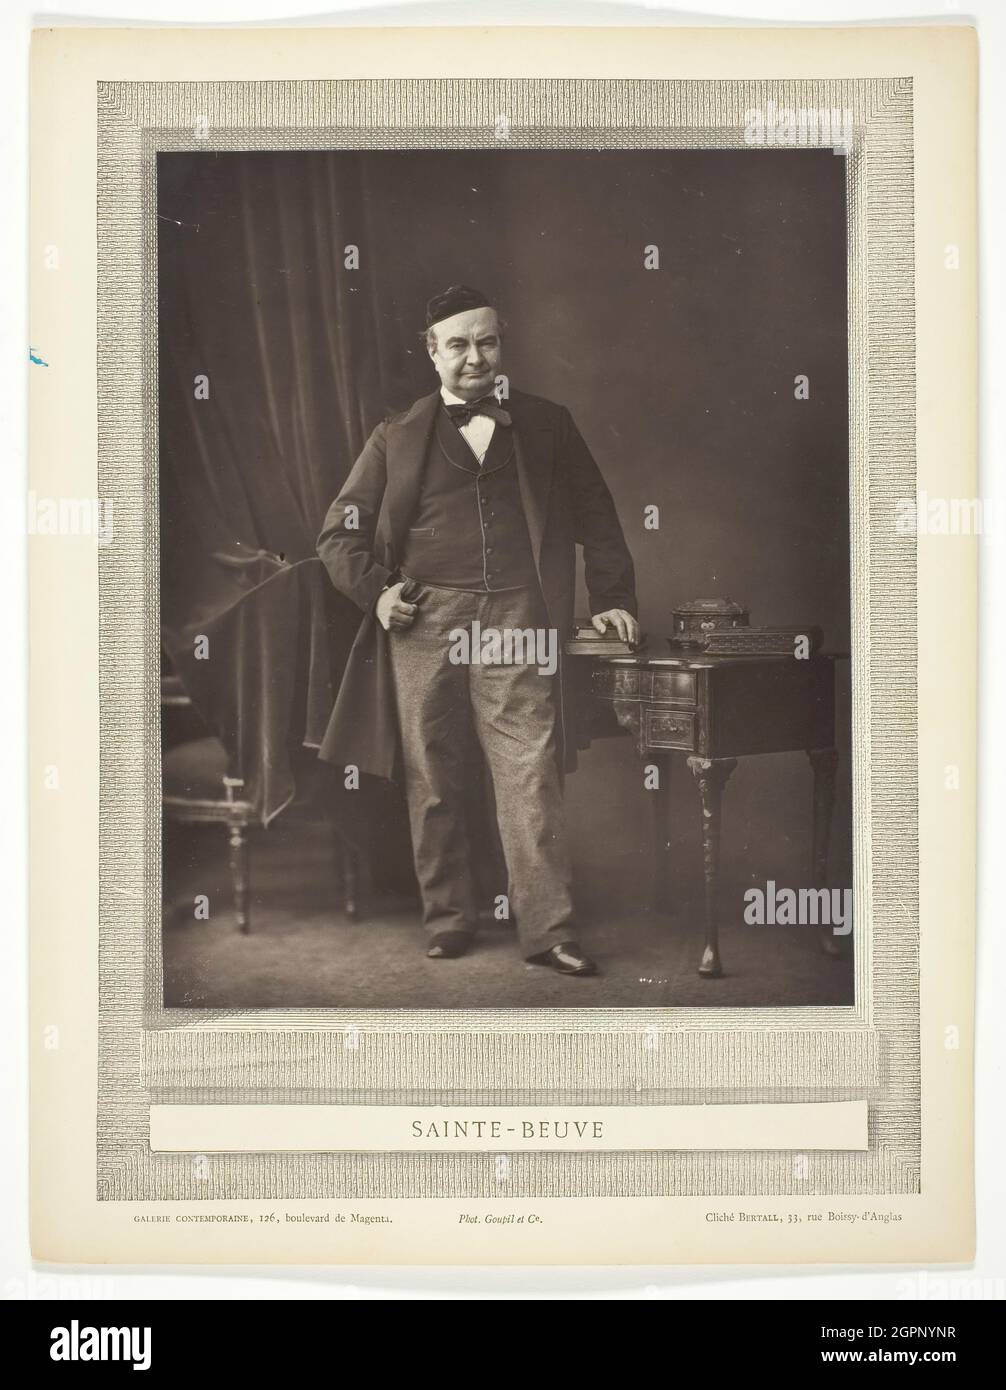 Sainte-Beuve, 1875/77. [Portrait of French writer and critic Charles Augustin Sainte-Beuve]. Woodburytype, from the periodical &quot;Galerie Contemporaine Litt&#xe9;raire, Artistique&quot; (1877), volume 2. Stock Photo